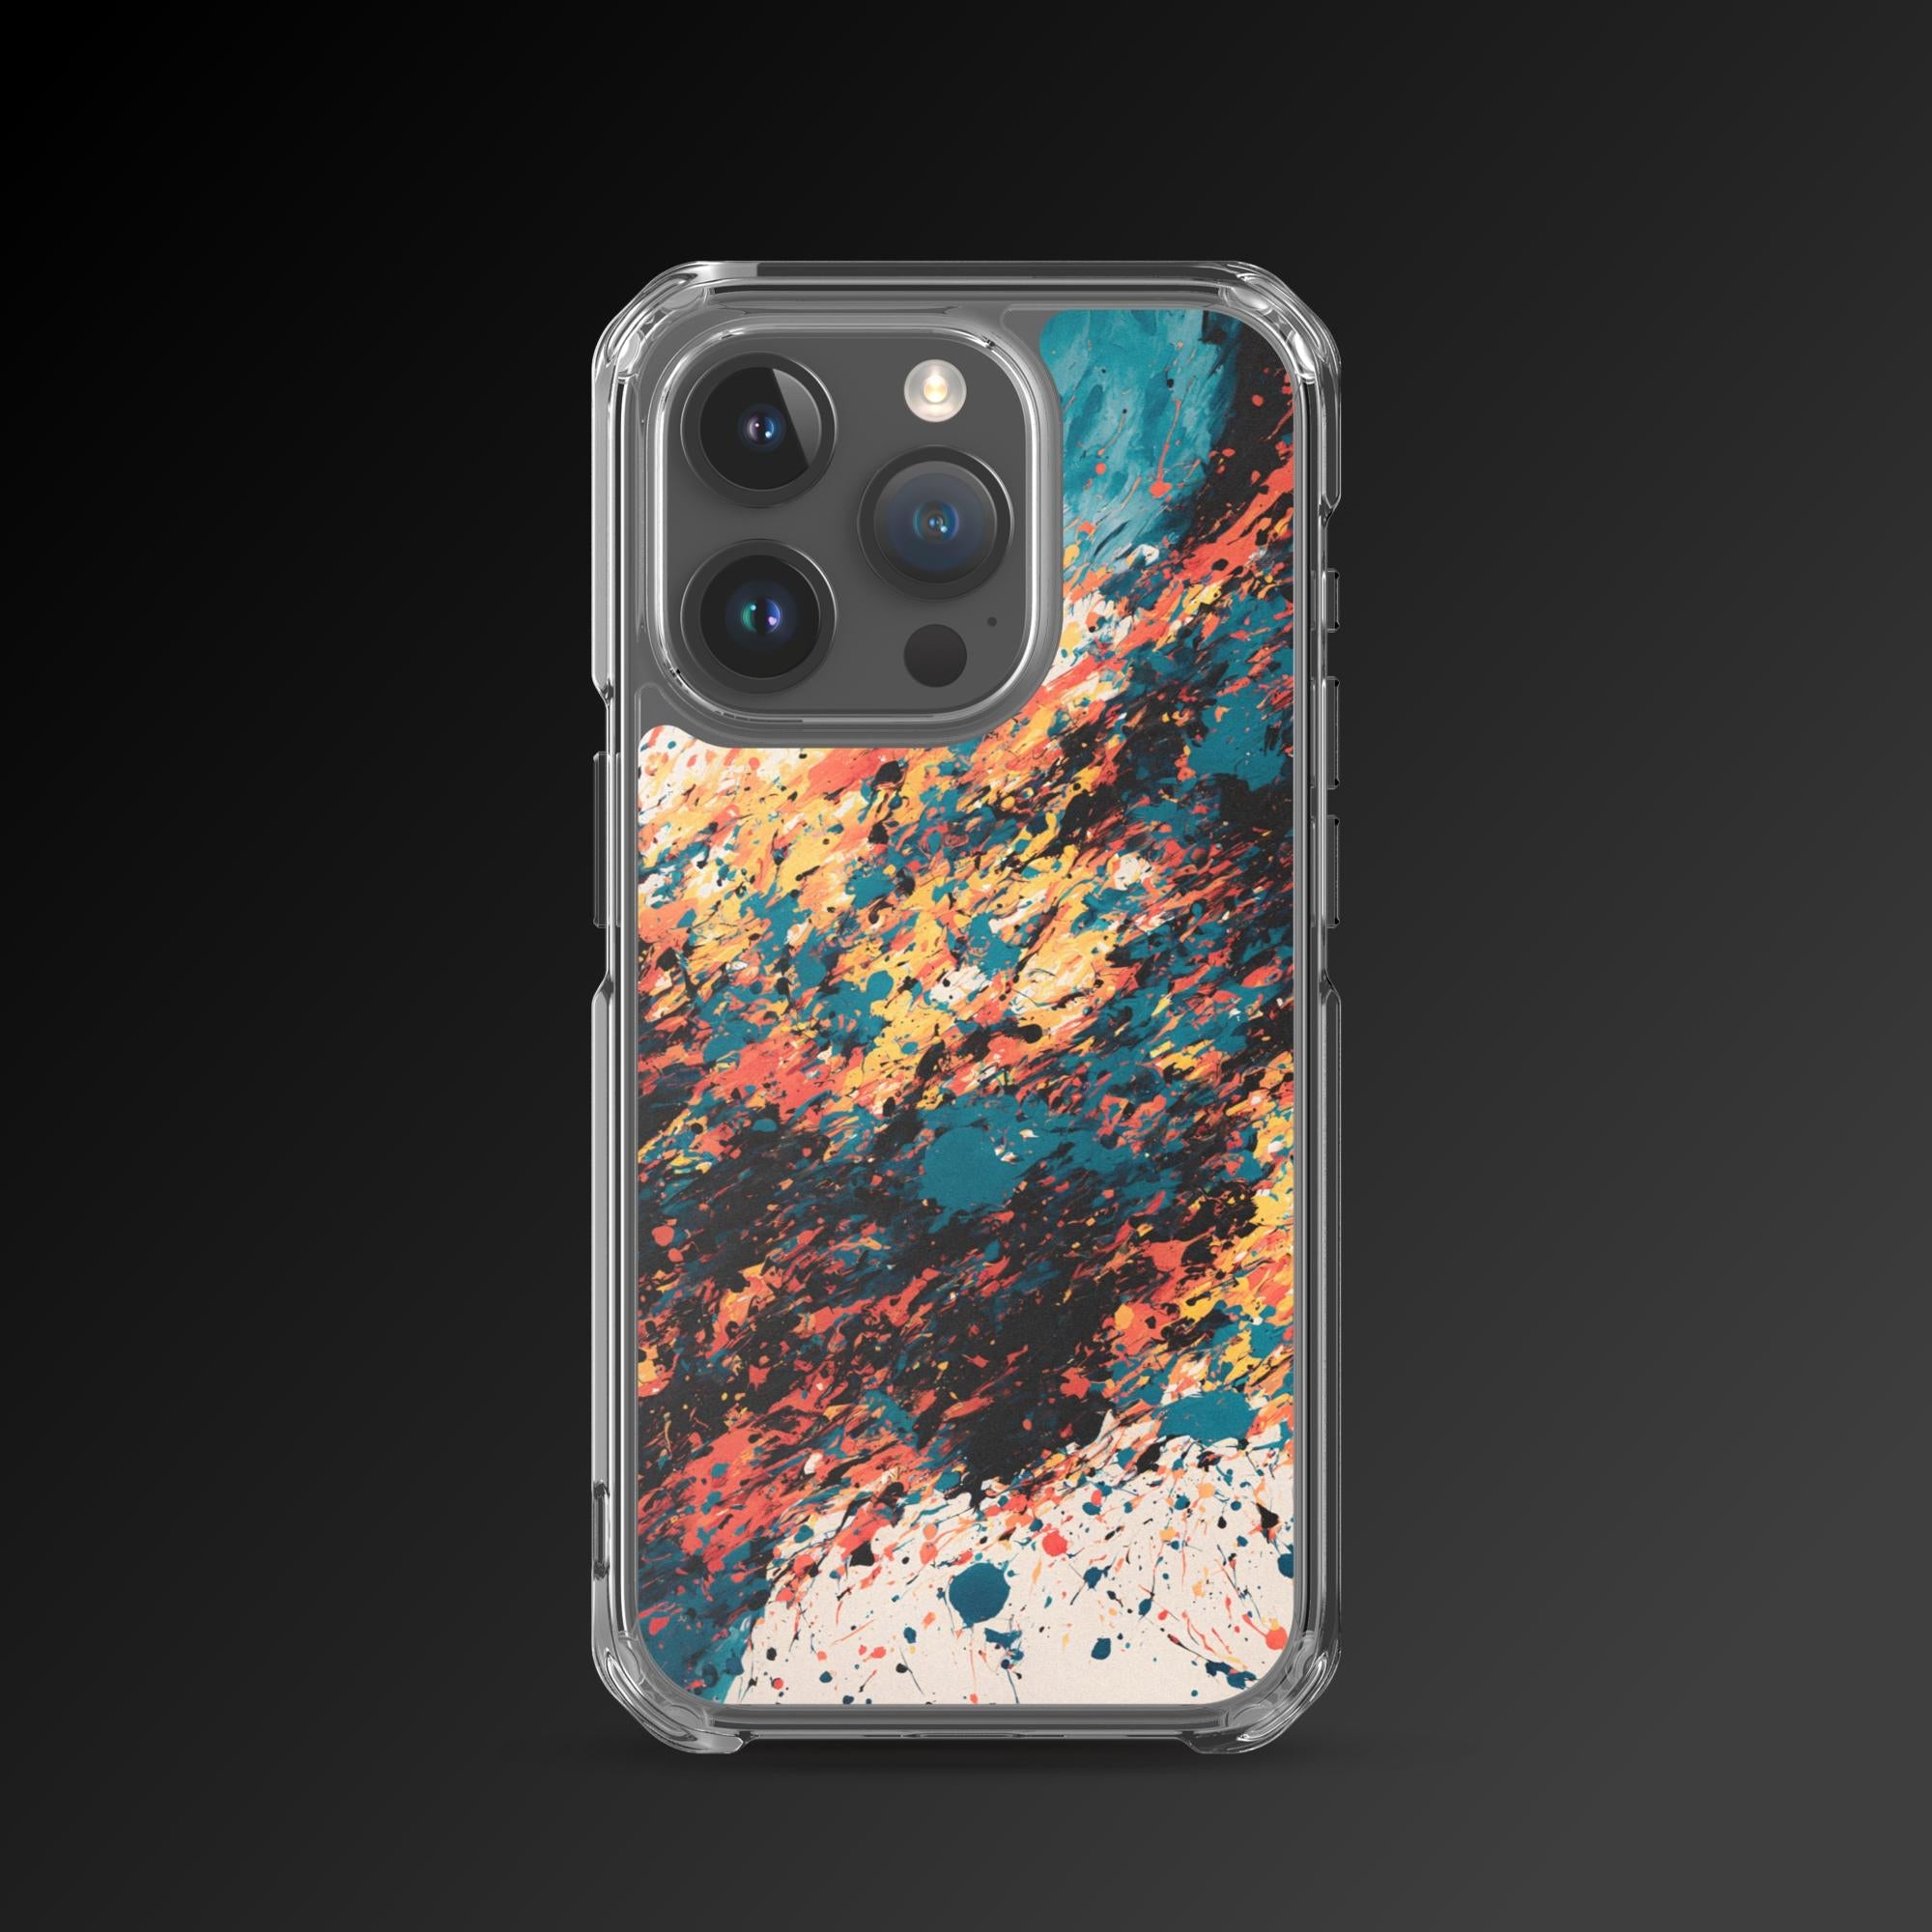 "Cross splash" clear iphone case - Clear iphone case - Ever colorful